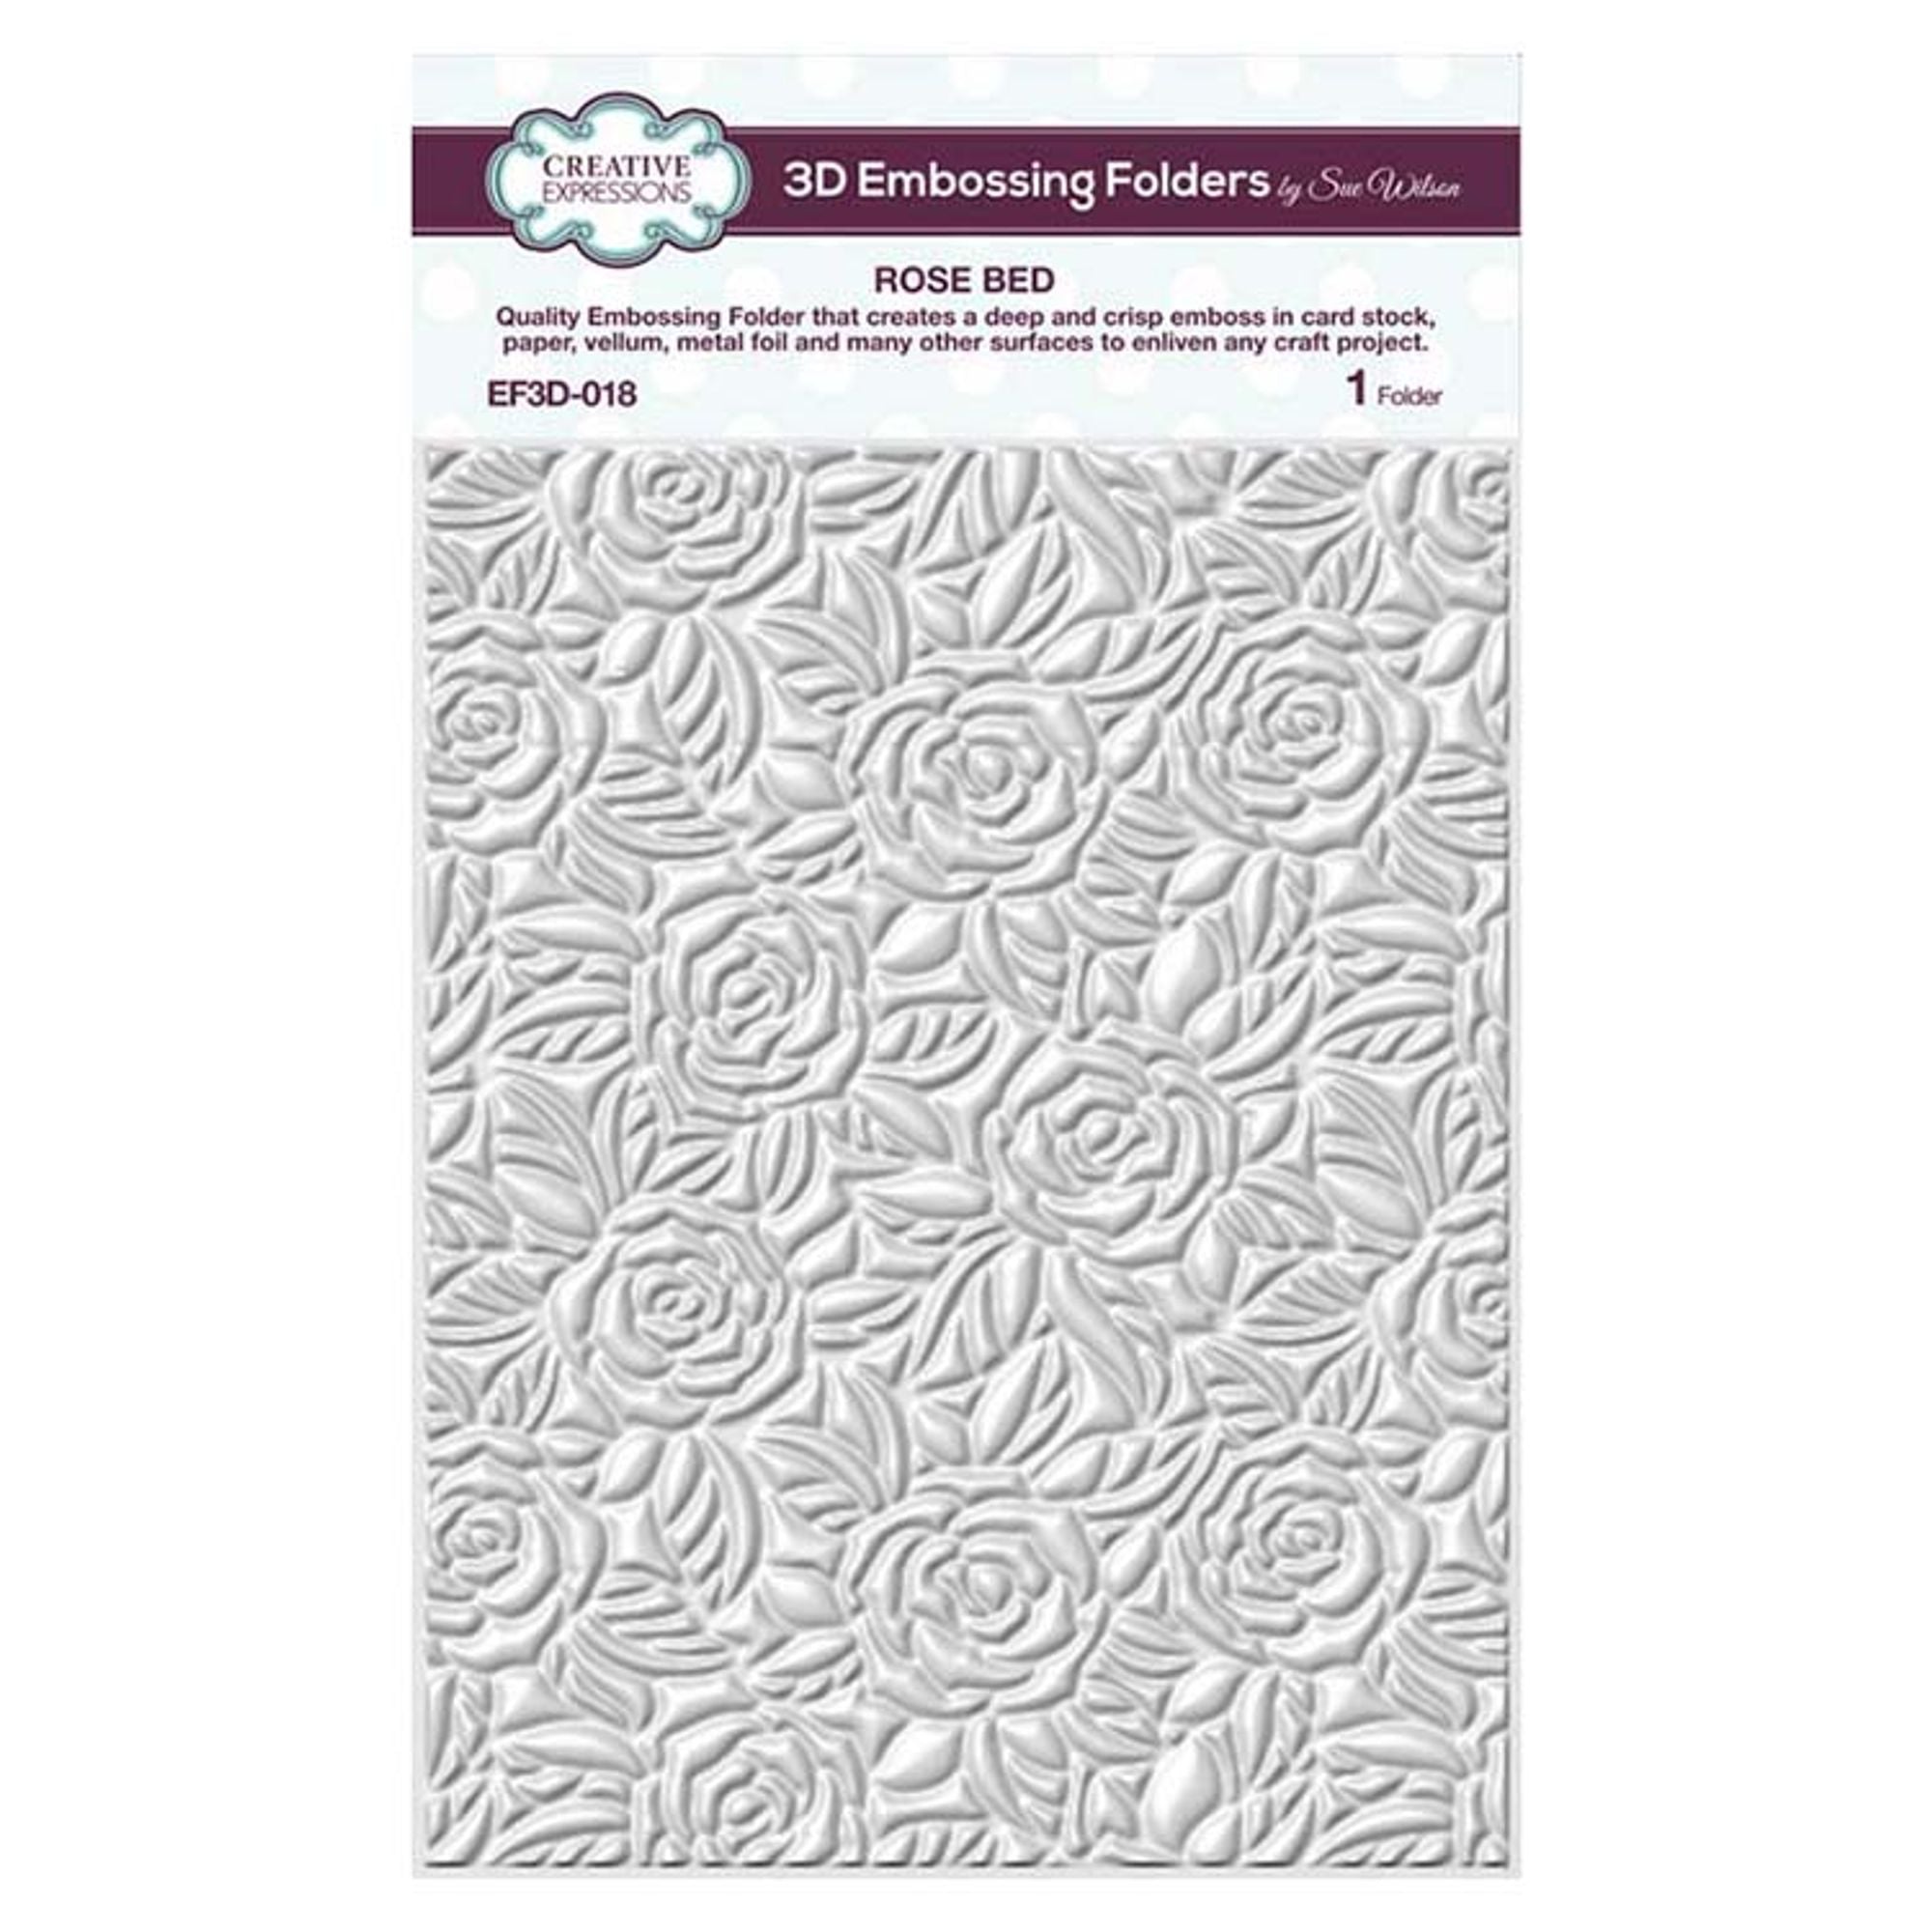 Creative Expressions Embossing Folder 3D 5 3/4 x 7 1/2 Rose Bed